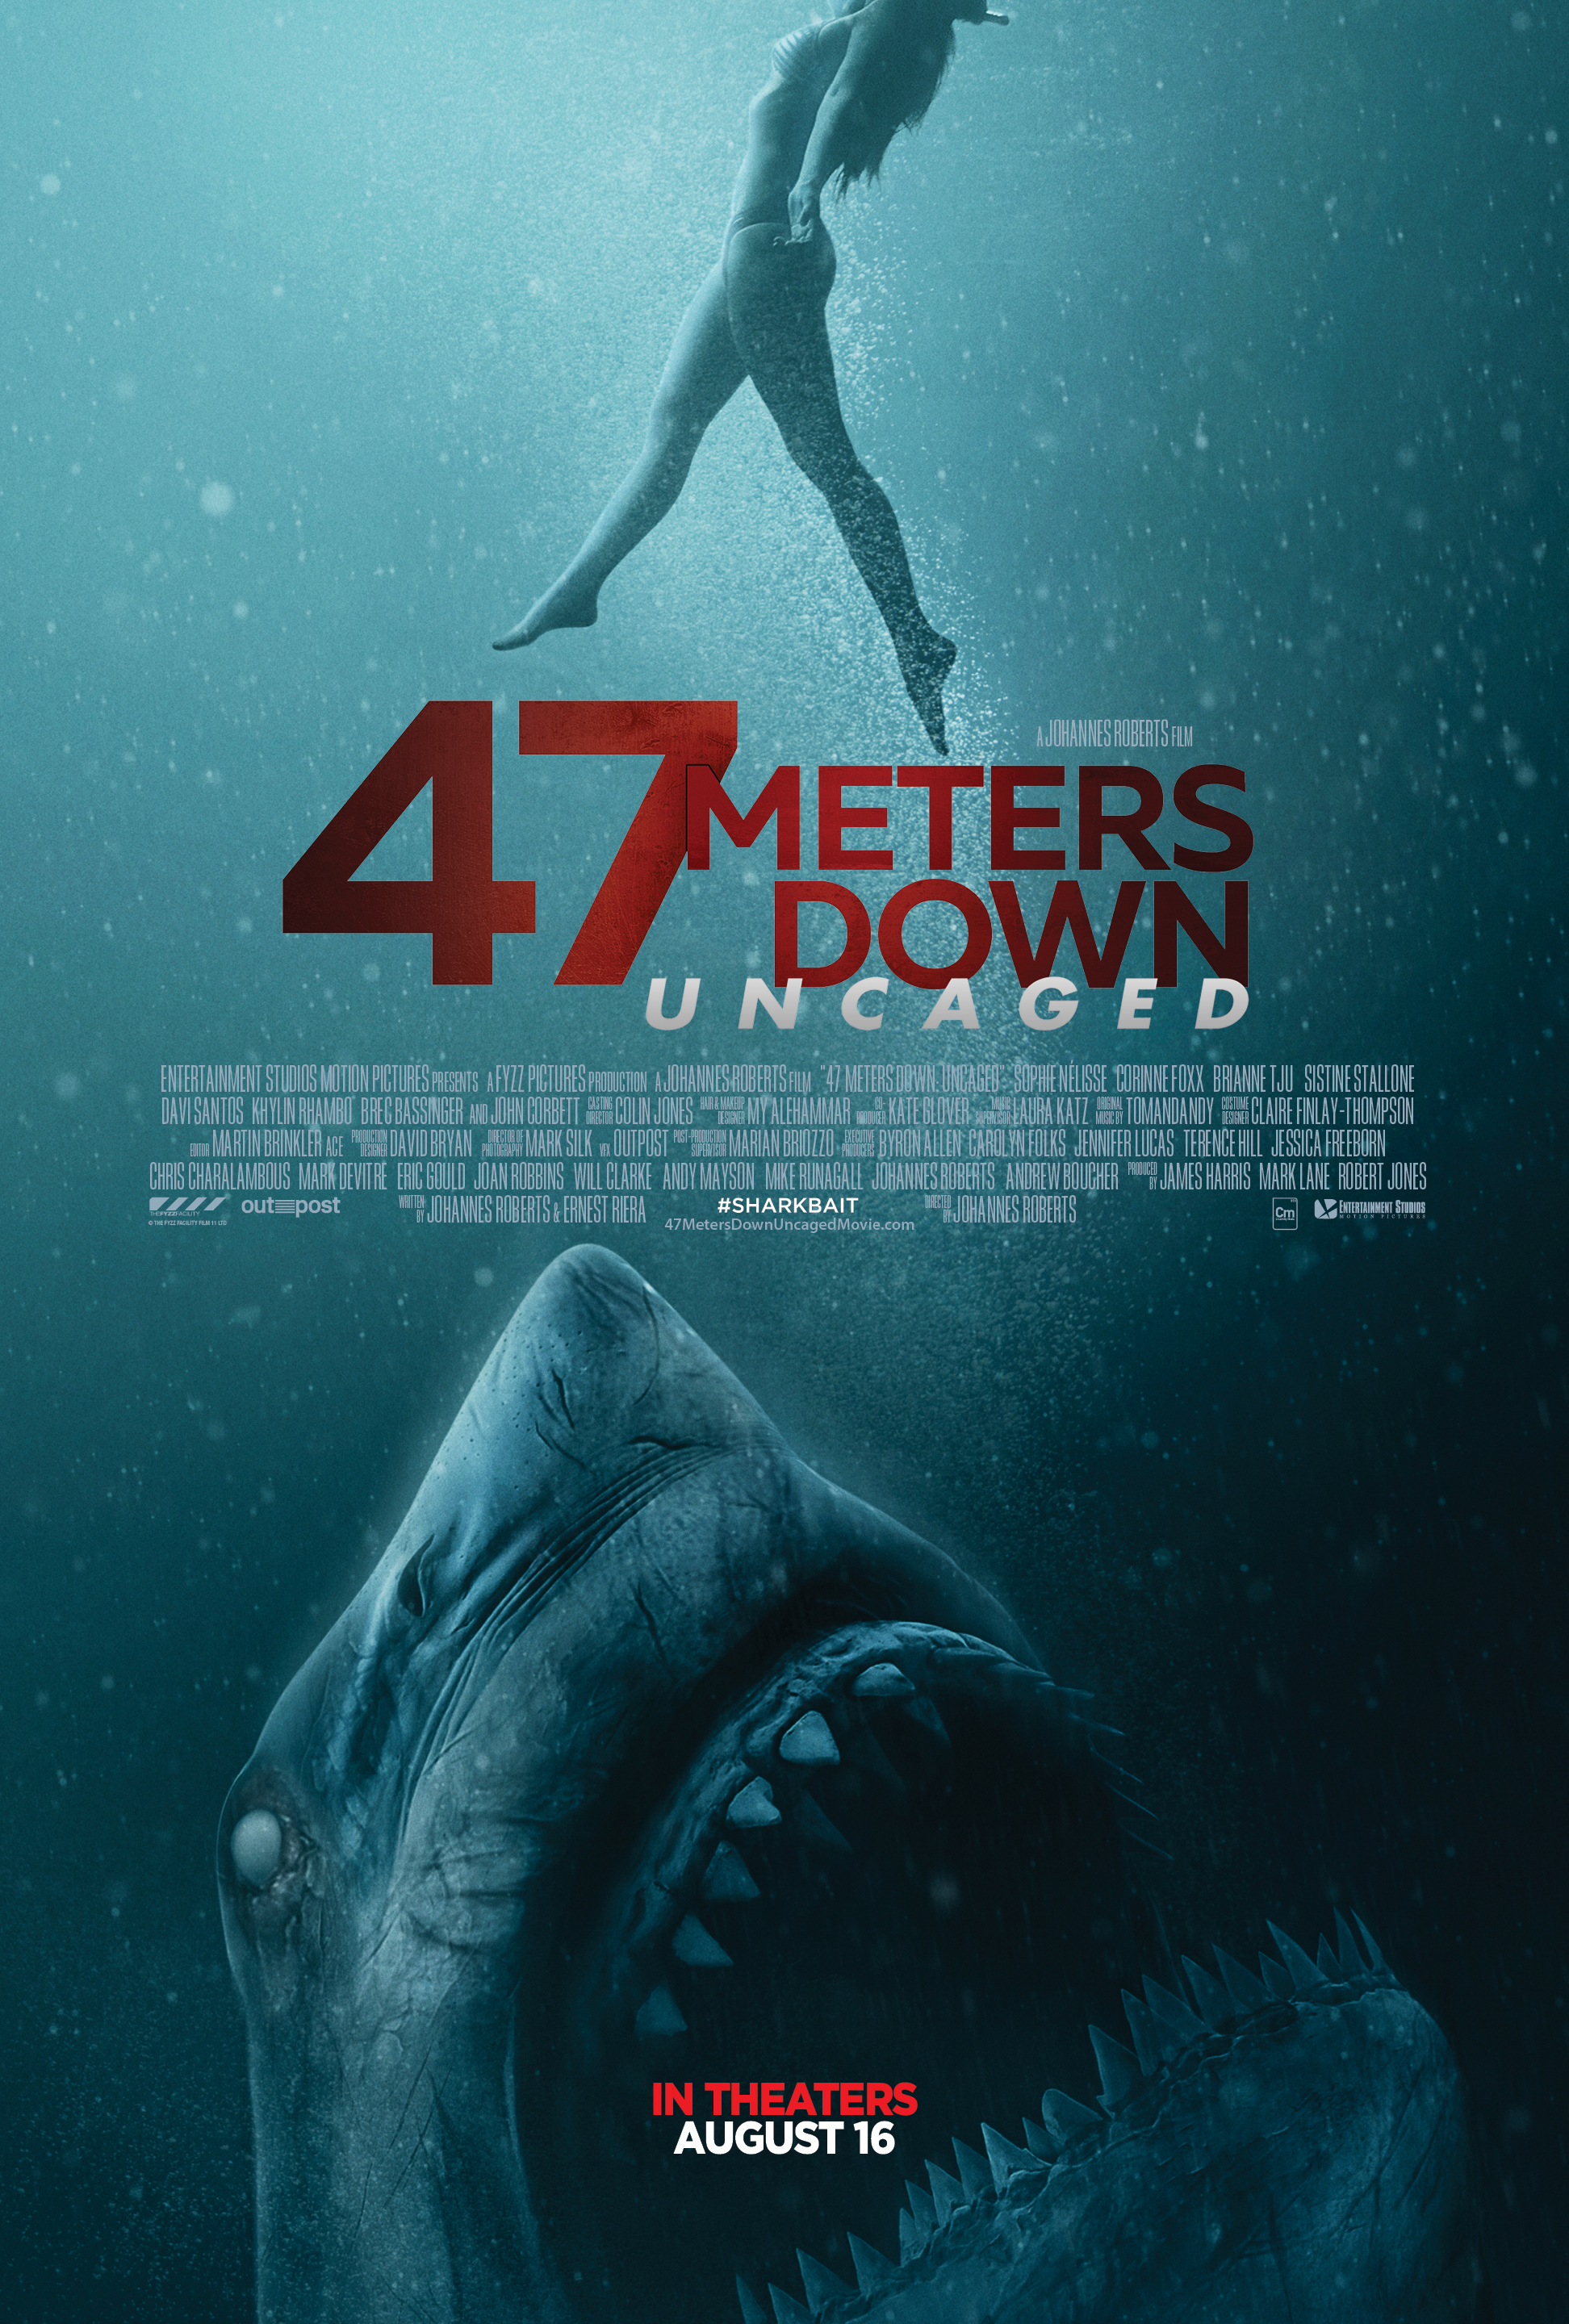 Latest Shark Movie 47 METERS DOWN UNCAGED Gets a Scary New Trailer We Are Movie Geeks